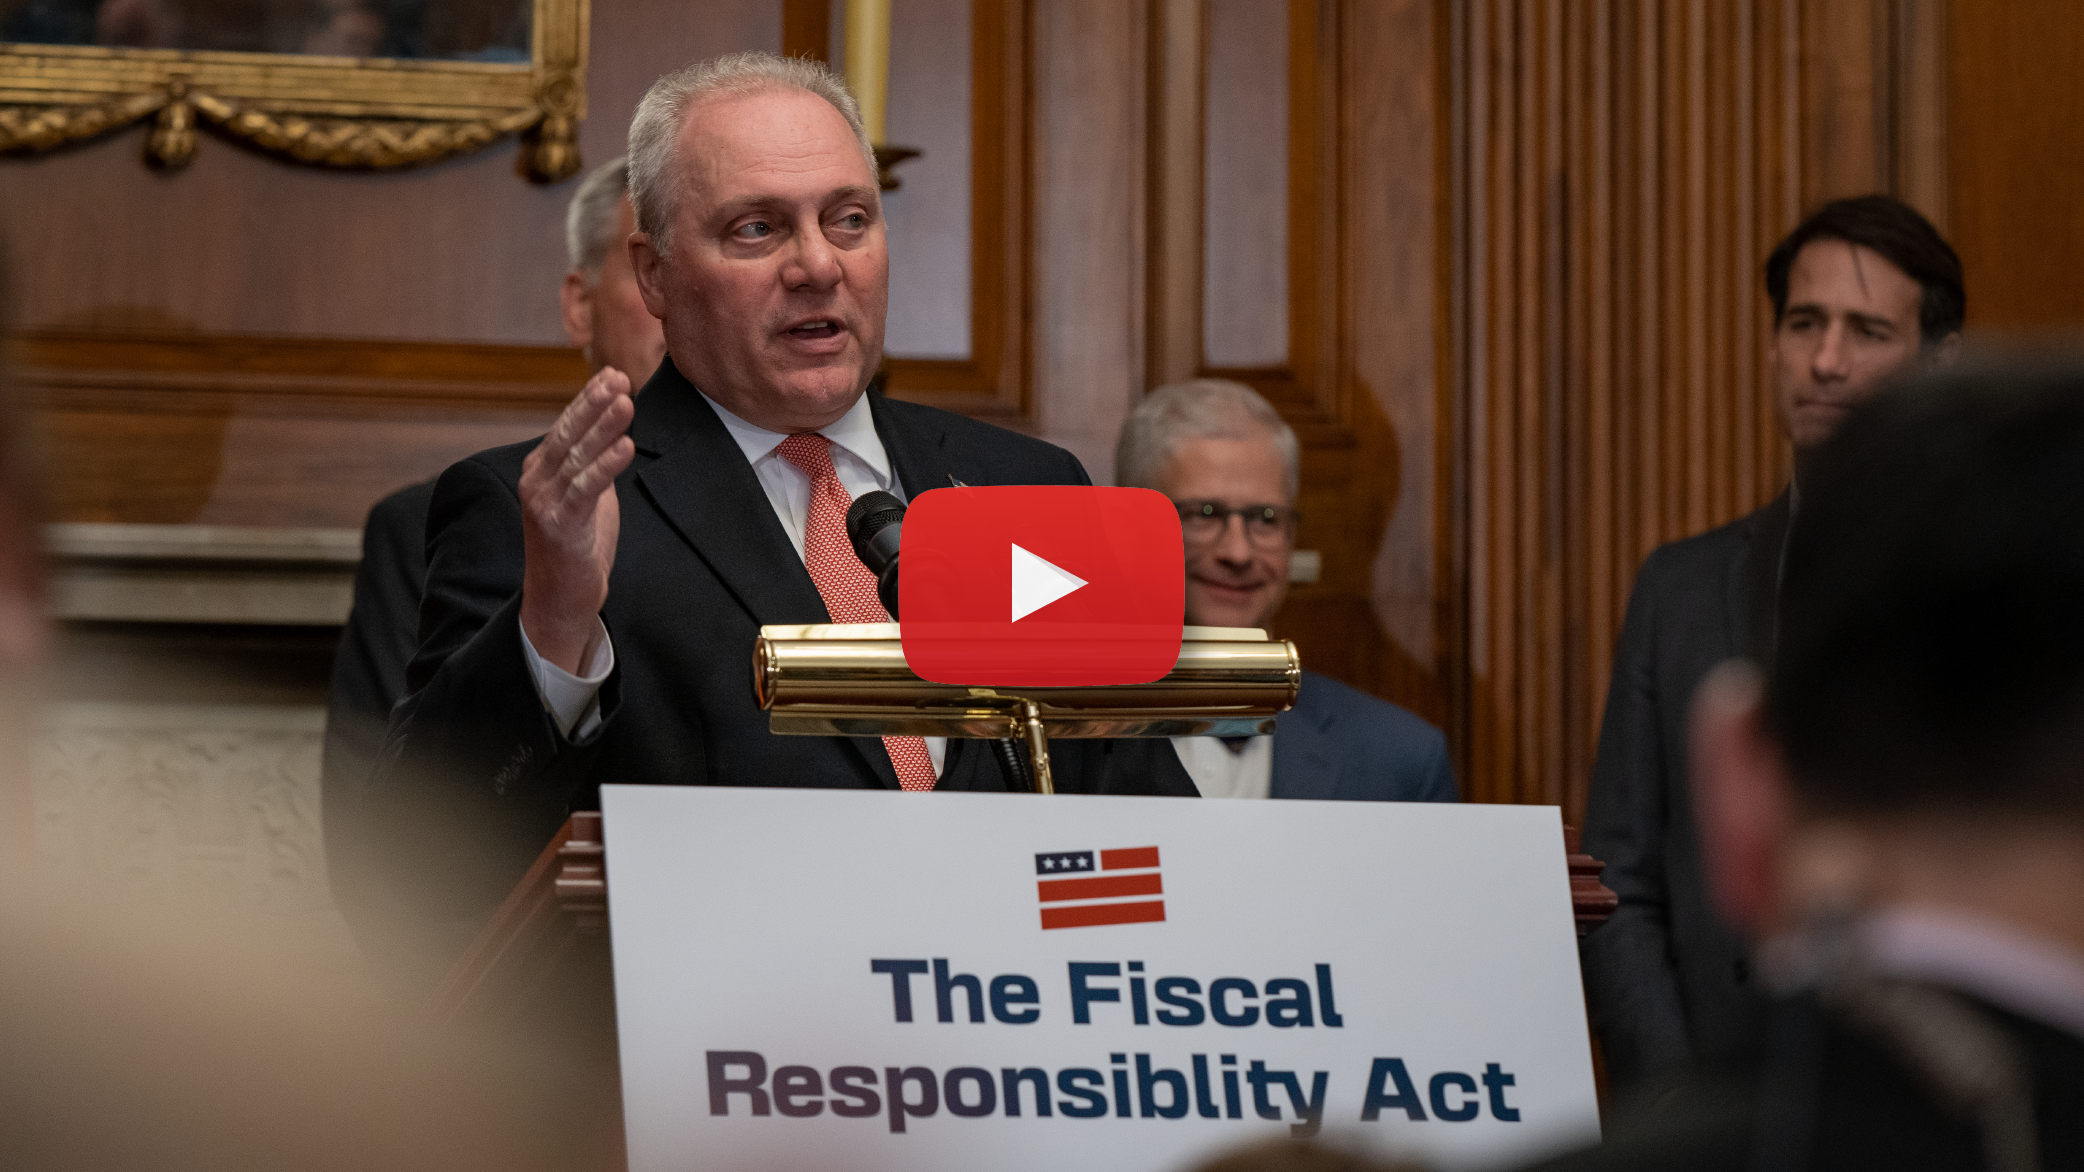 Scalise: This Is the First Step In Restoring Fiscal Sanity In Washington